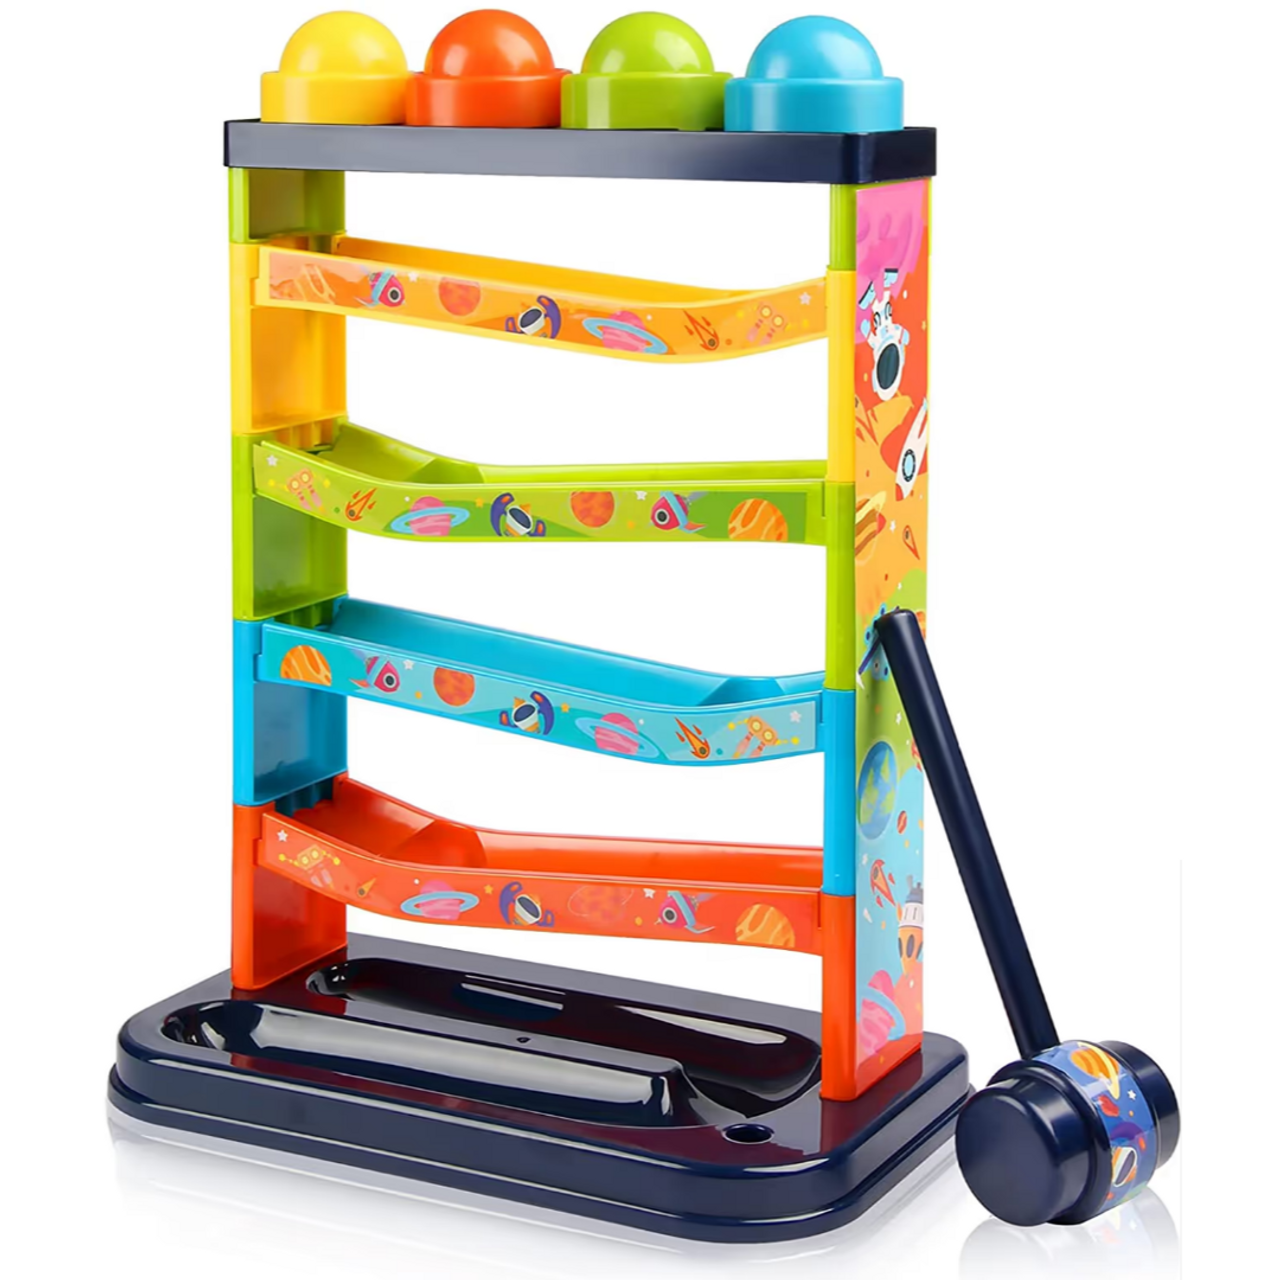 Toddlers' Pound-a-Ball Toy with Hammer product image